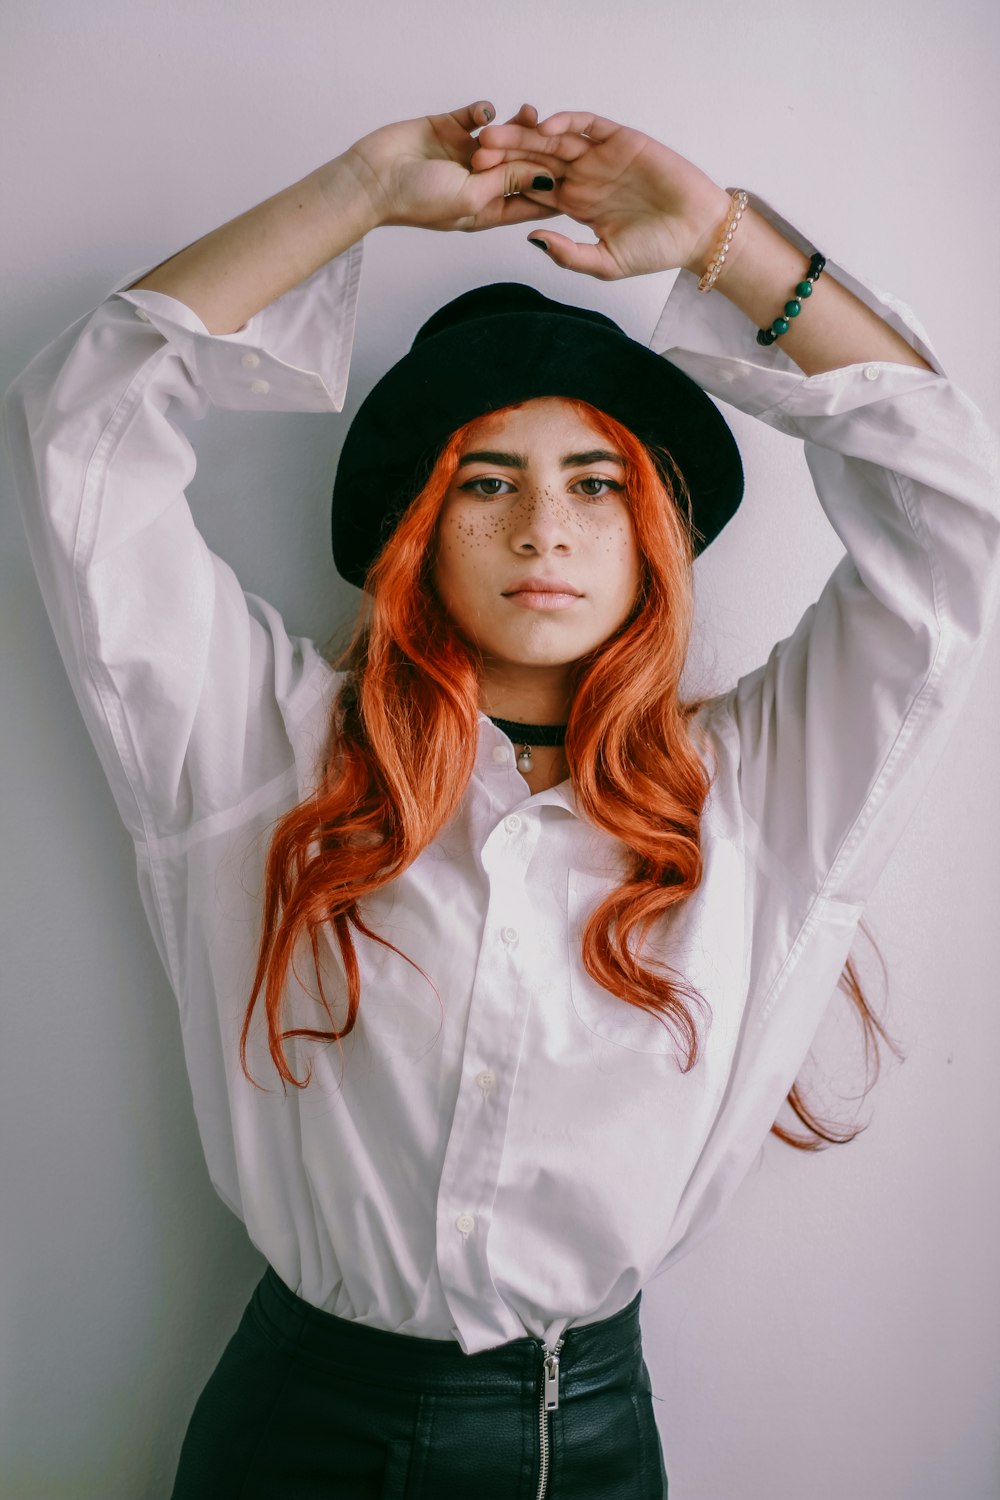 a woman with red hair wearing a white shirt and black hat